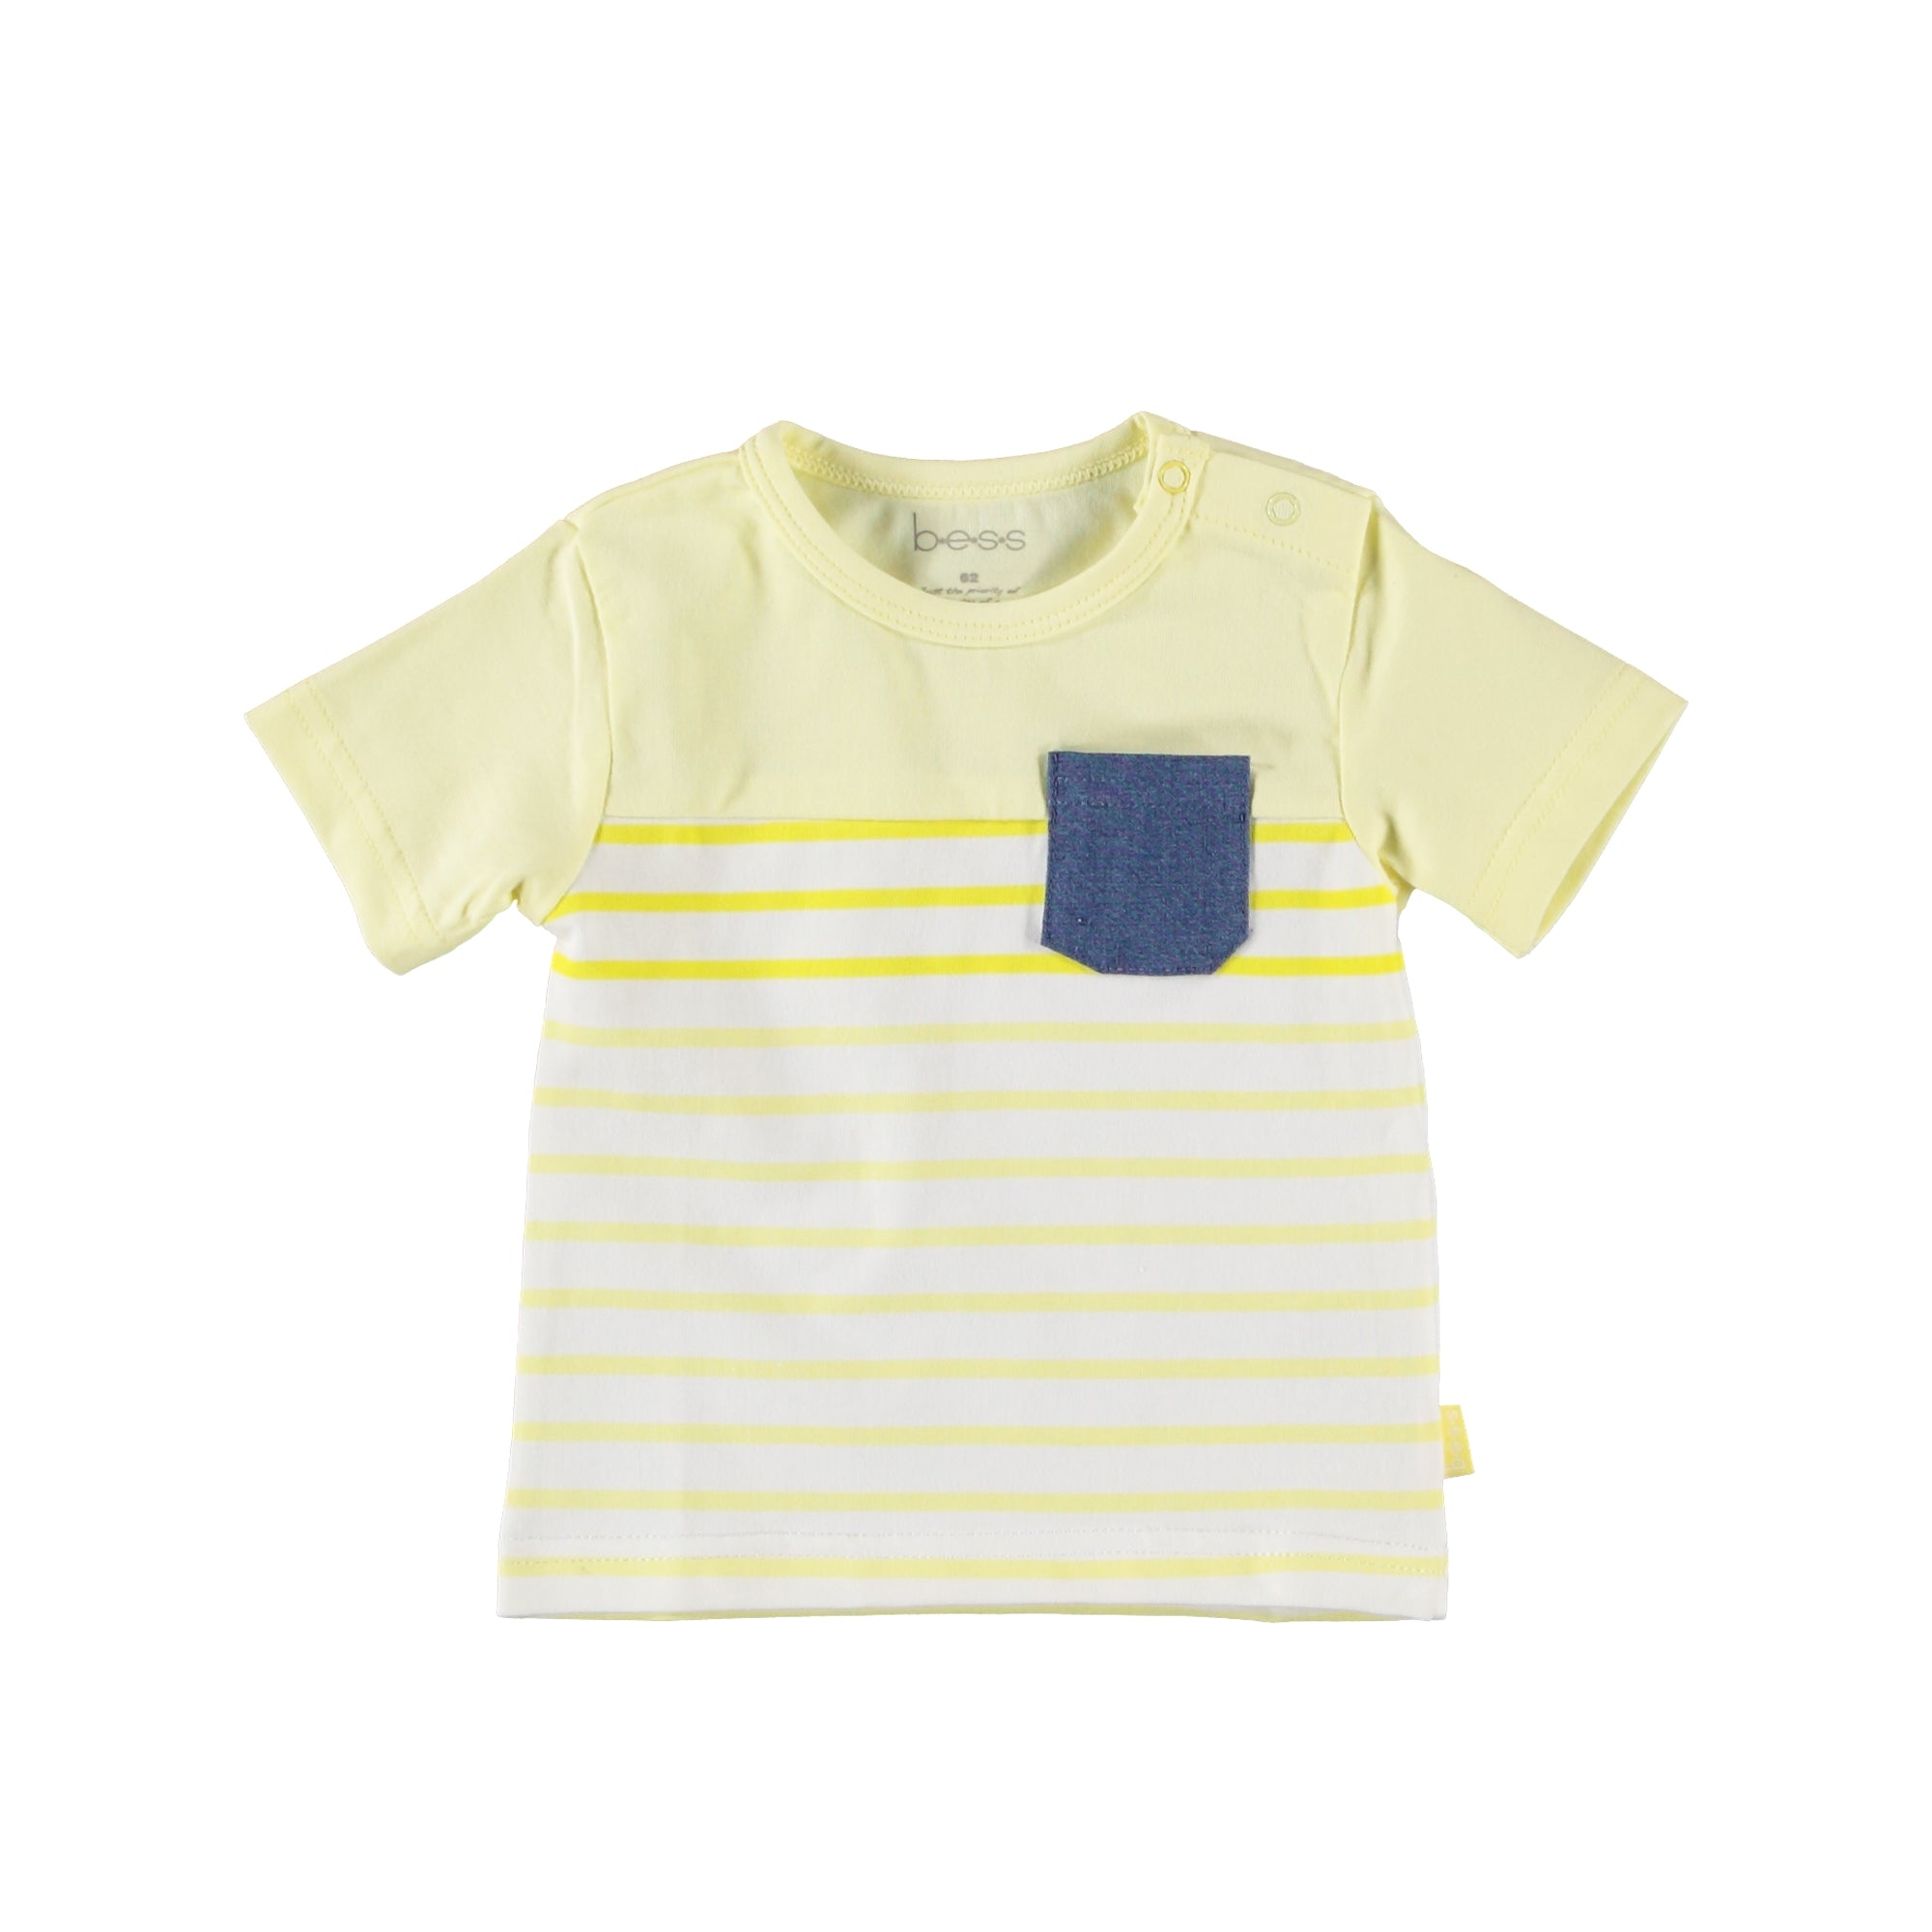 B.E.S.S. T-shirt Striped with Pocket